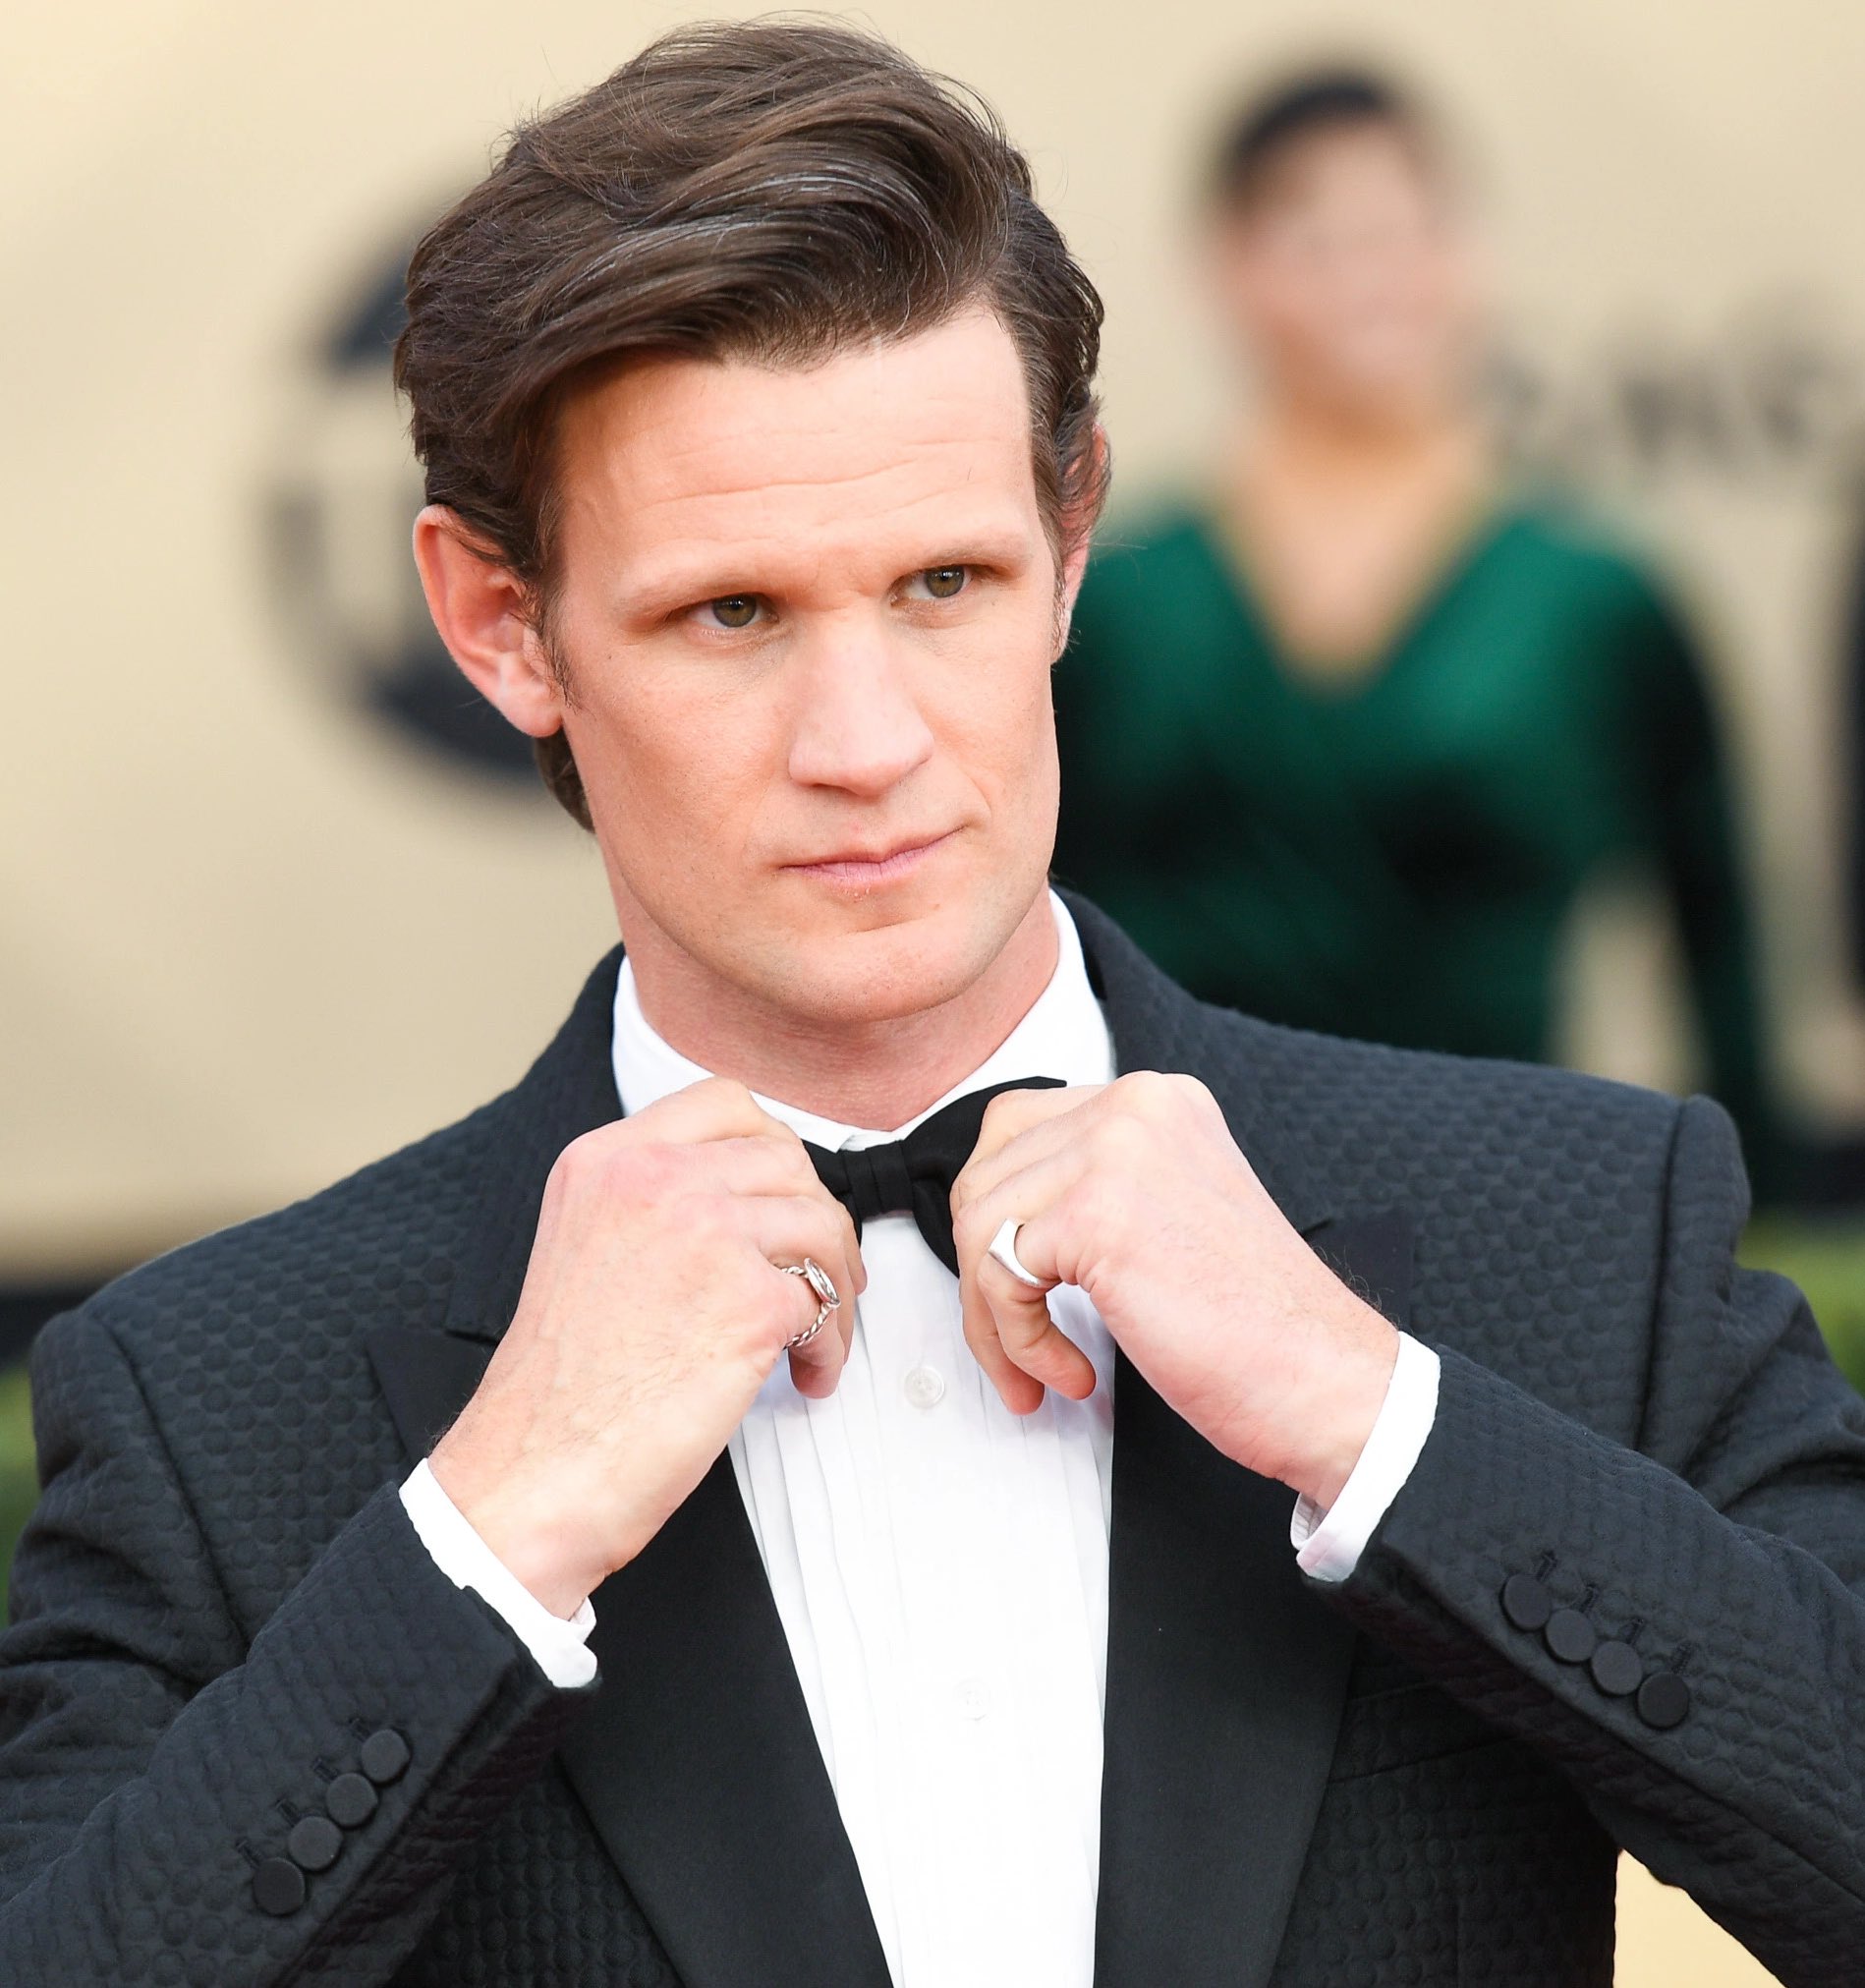 Happy 40th Birthday to Matt Smith

How this man is 40, I have no idea. Forever the Doctor in our hearts 